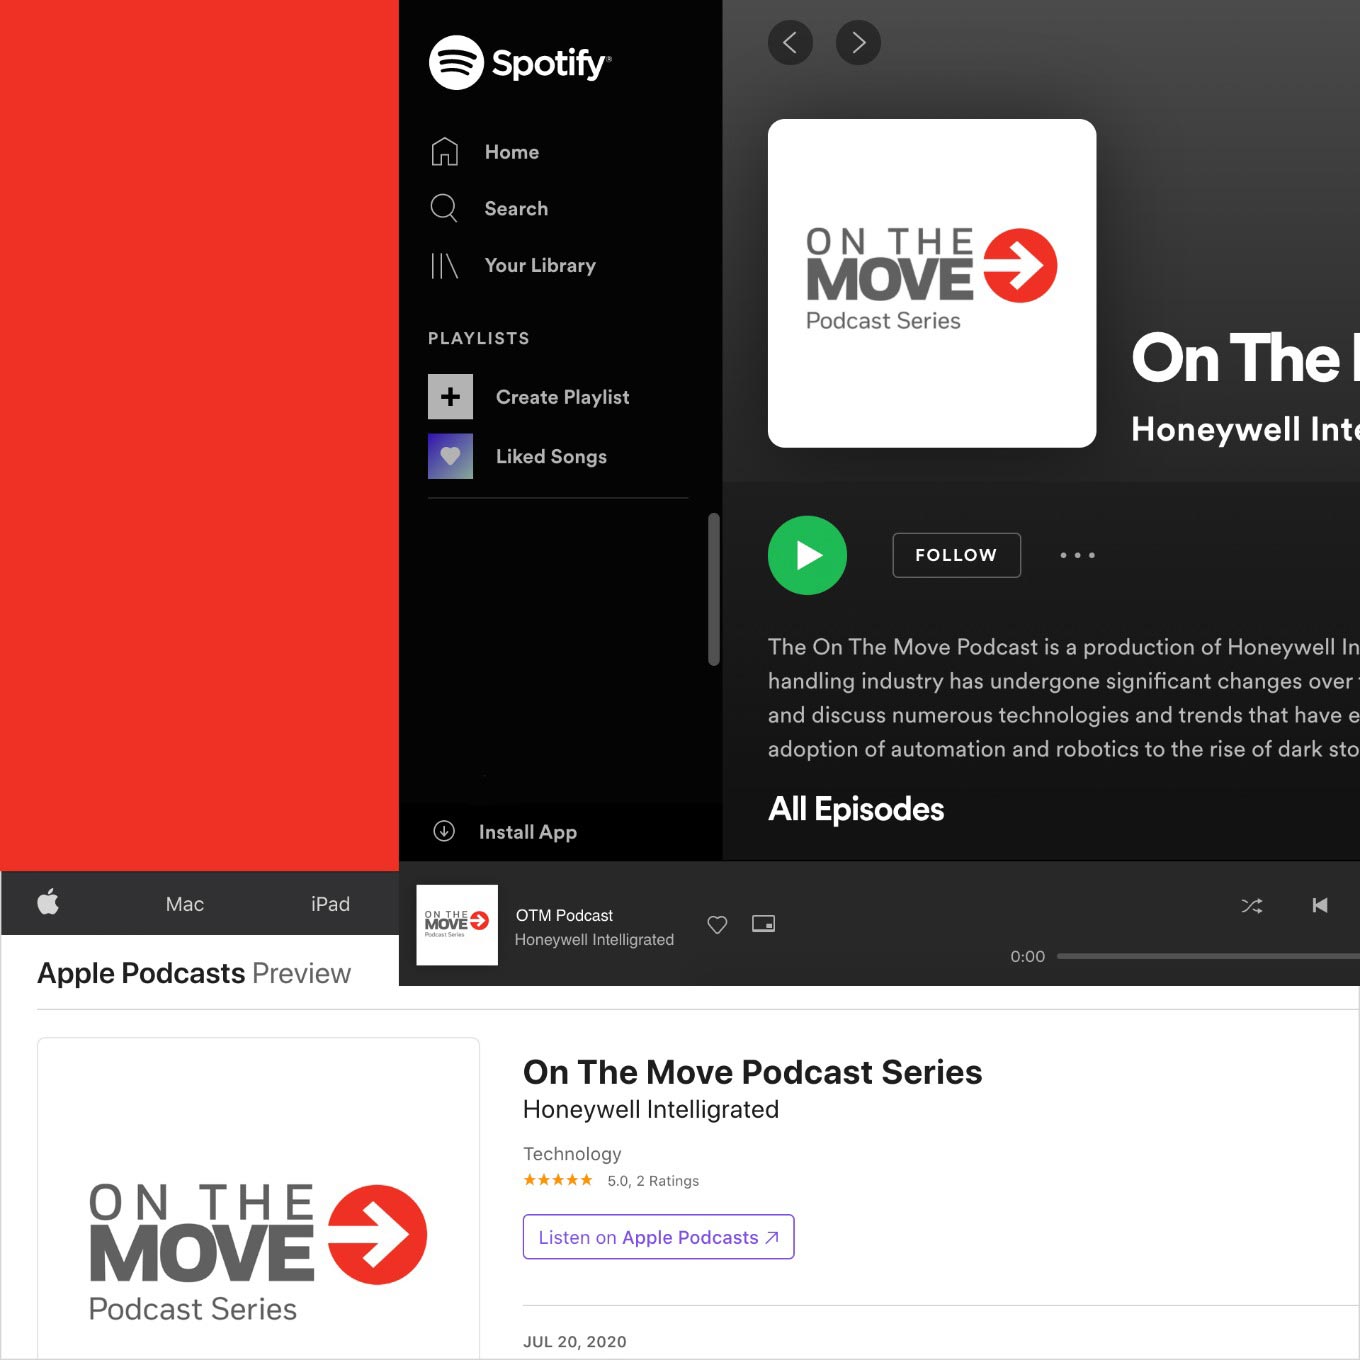 On The Move podcast series